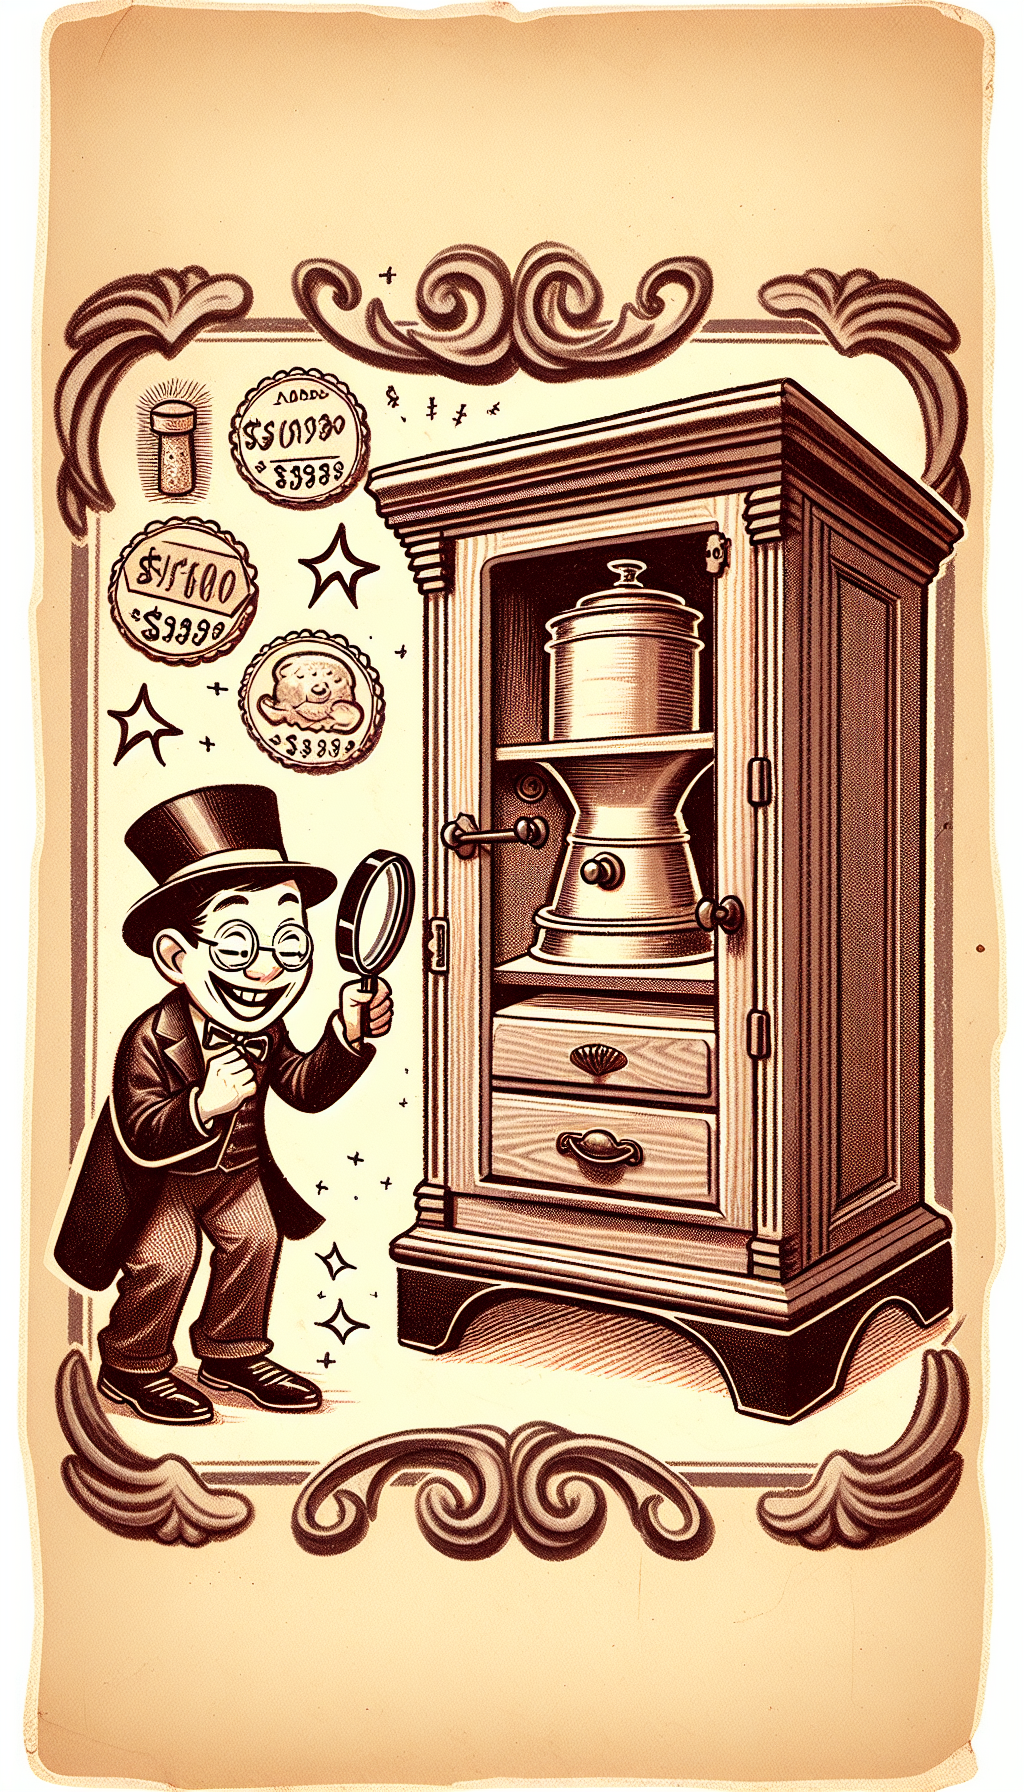 A whimsical sepia-toned illustration depicts a joyful collector holding a magnifying glass, examining the intricate details of a classic Hoosier cabinet, its door ajar to highlight a prominent, gleaming flour sifter. Vignette flourishes frame the scene, with price tags and rarity stars floating above the cabinet, symbolizing the treasure hunt and the value of the antique.